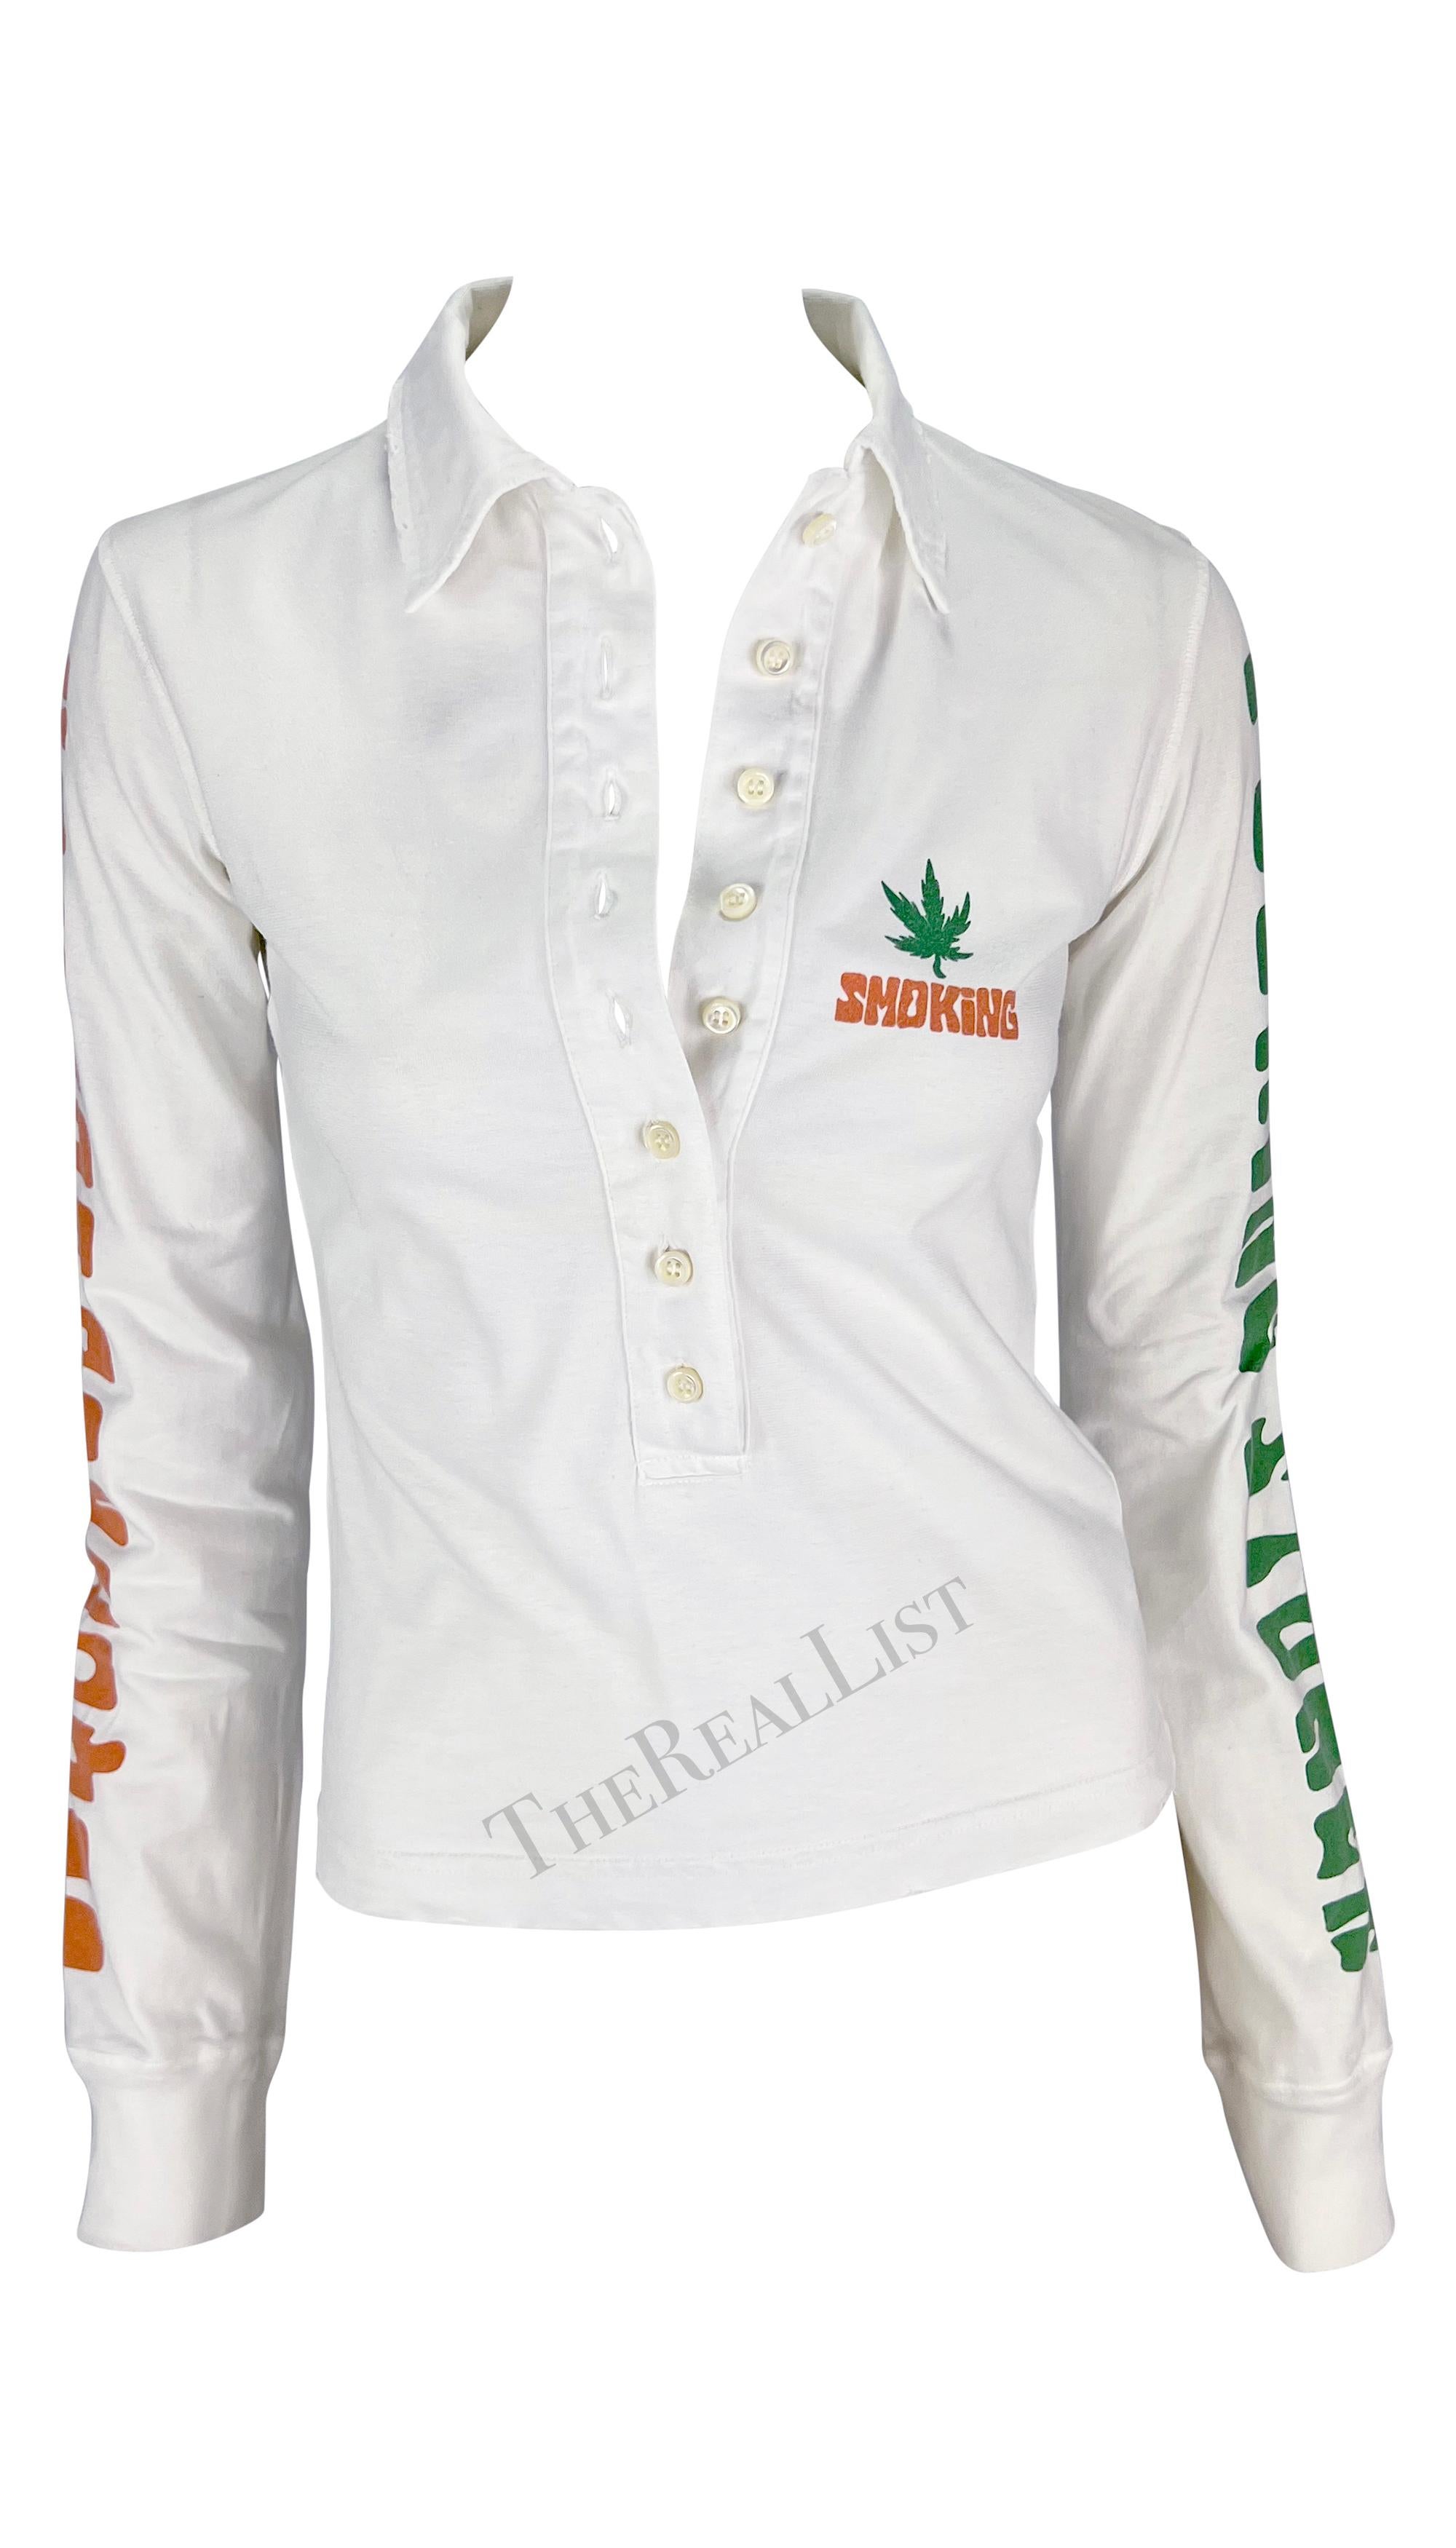 Presenting a distressed white Dsquared2 rugby-style shirt. From the Spring/Summer 2005 collection, this chic top features distressing throughout, a plunging button-up neckline, a pot leaf and 'smoking' screen printed at the bust, and 'fucking